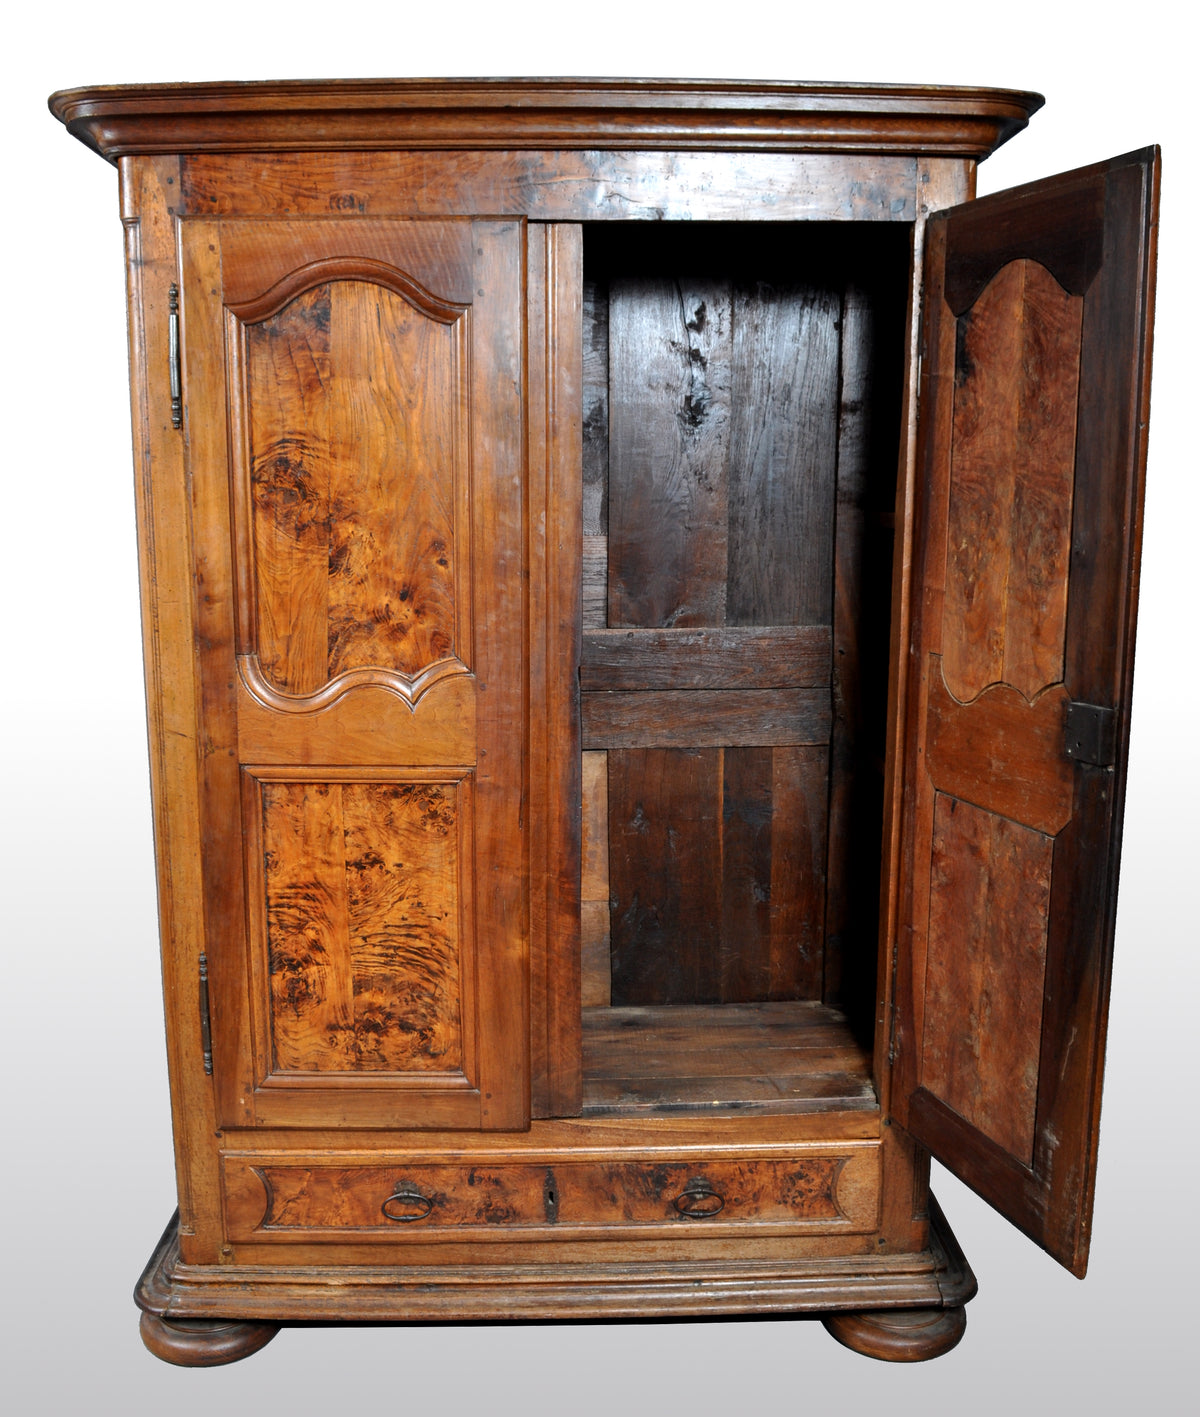 Antique French Provincial Finely Figured Walnut Wedding Armoire, circa 1750